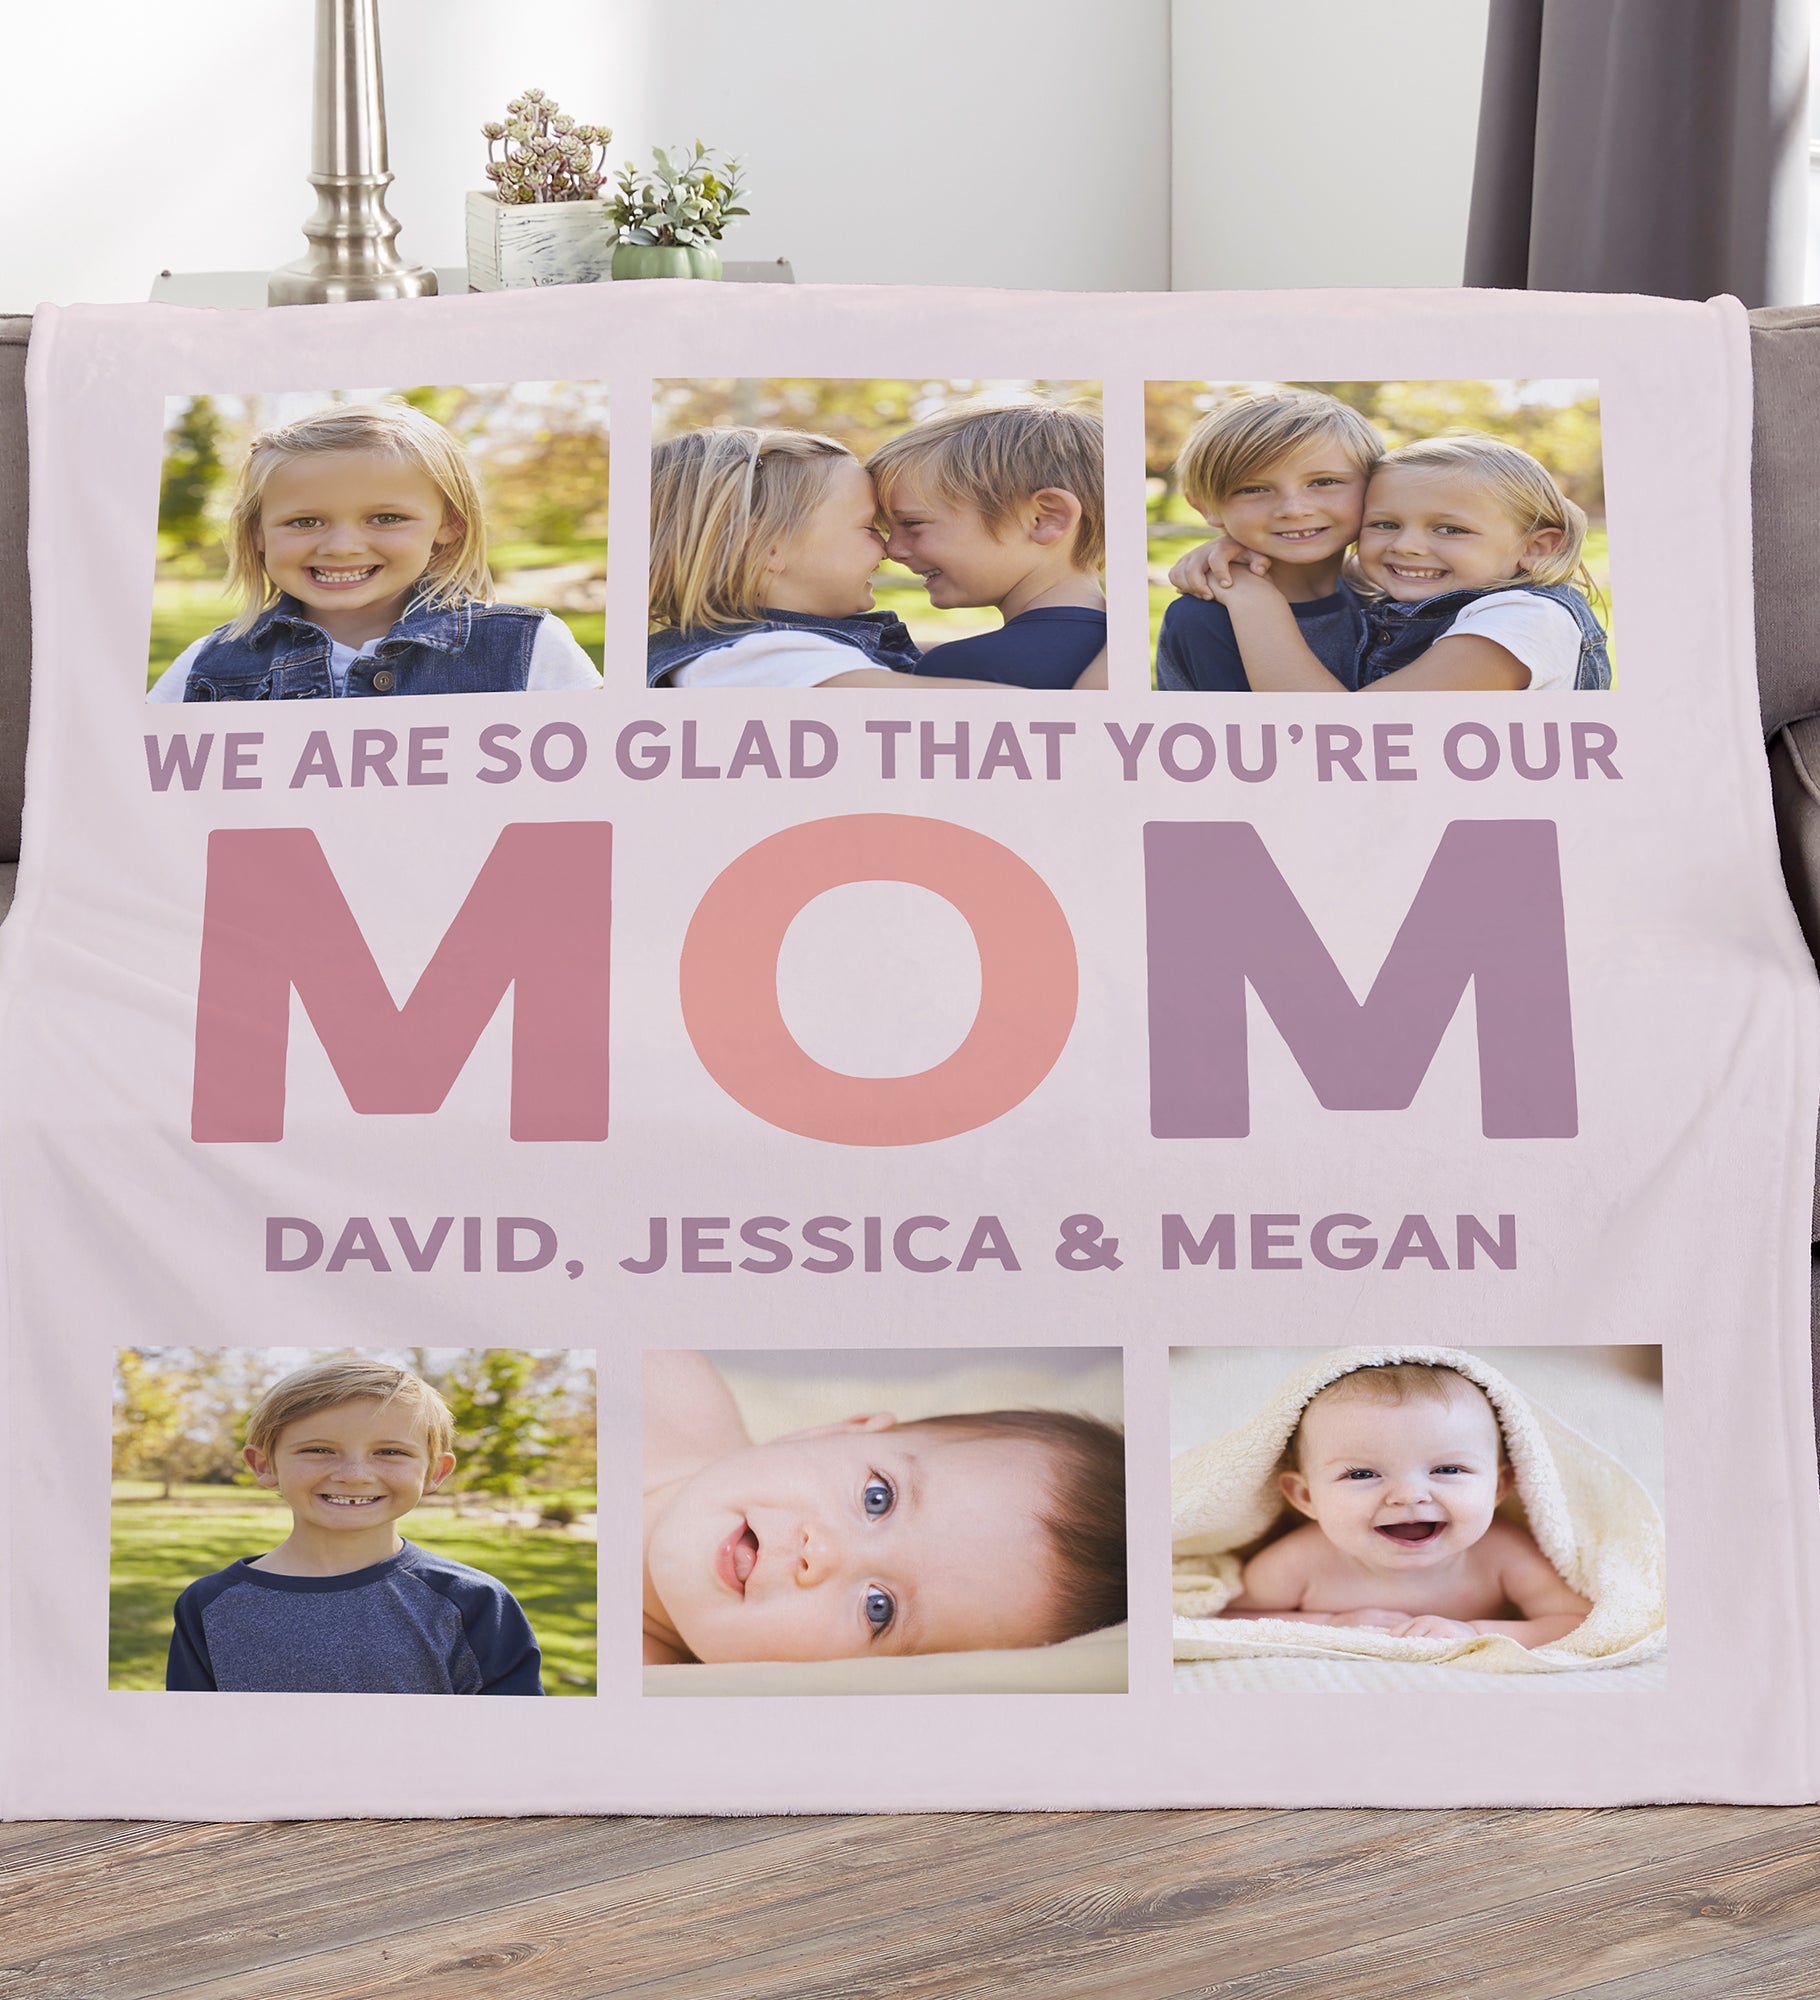 Glad You're Our Mom Personalized Photo Blanket